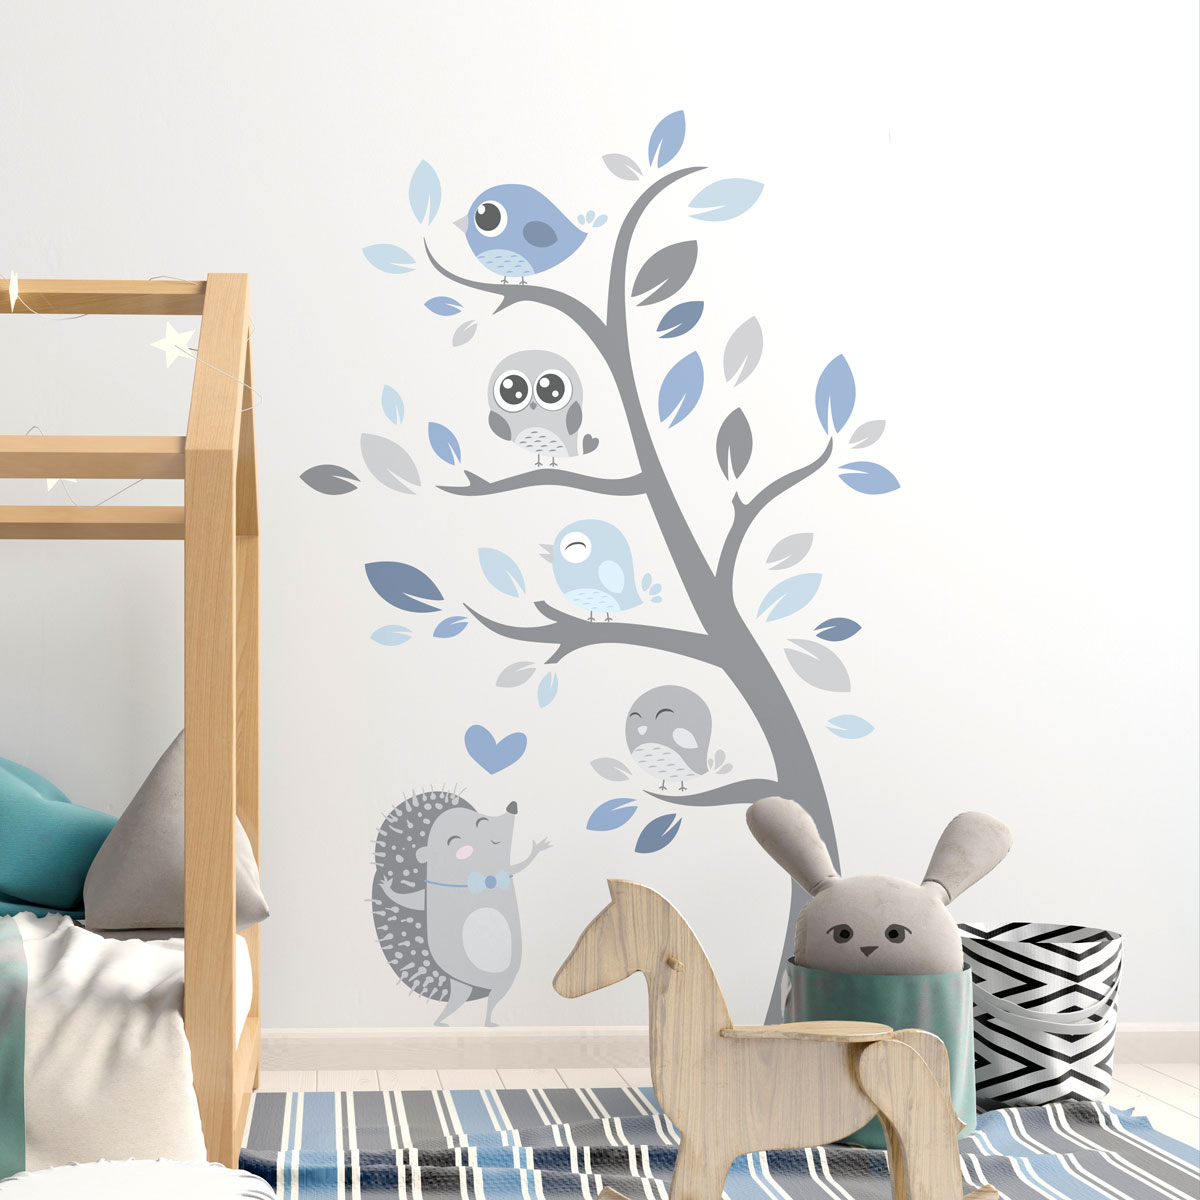 Hedgehog and bird friends for life wall decal